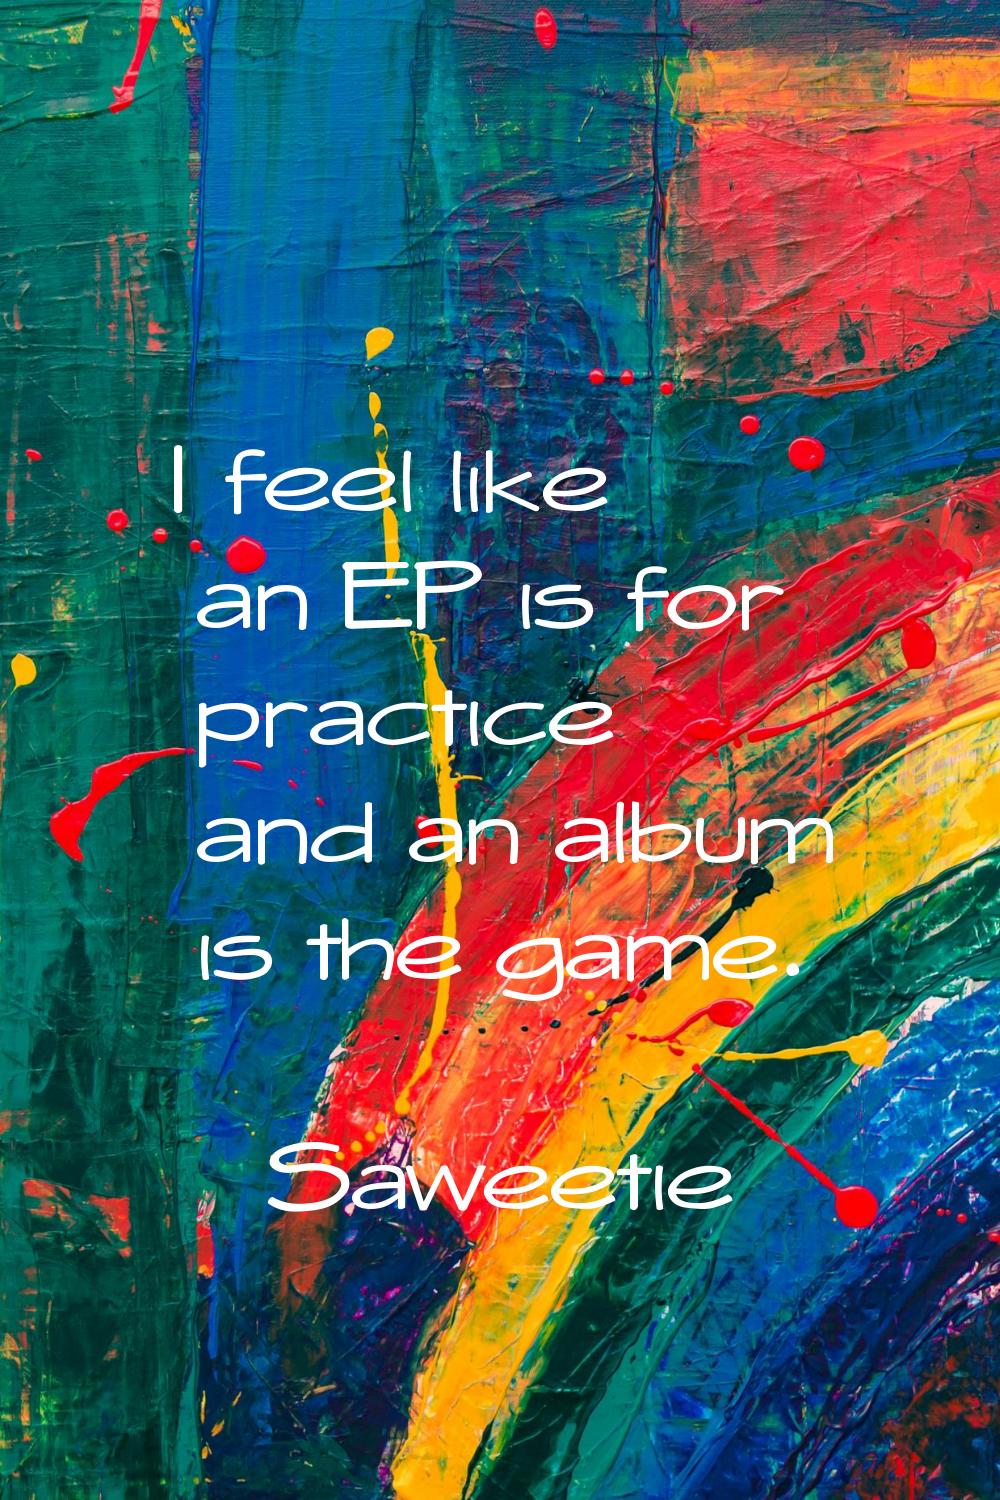 I feel like an EP is for practice and an album is the game.